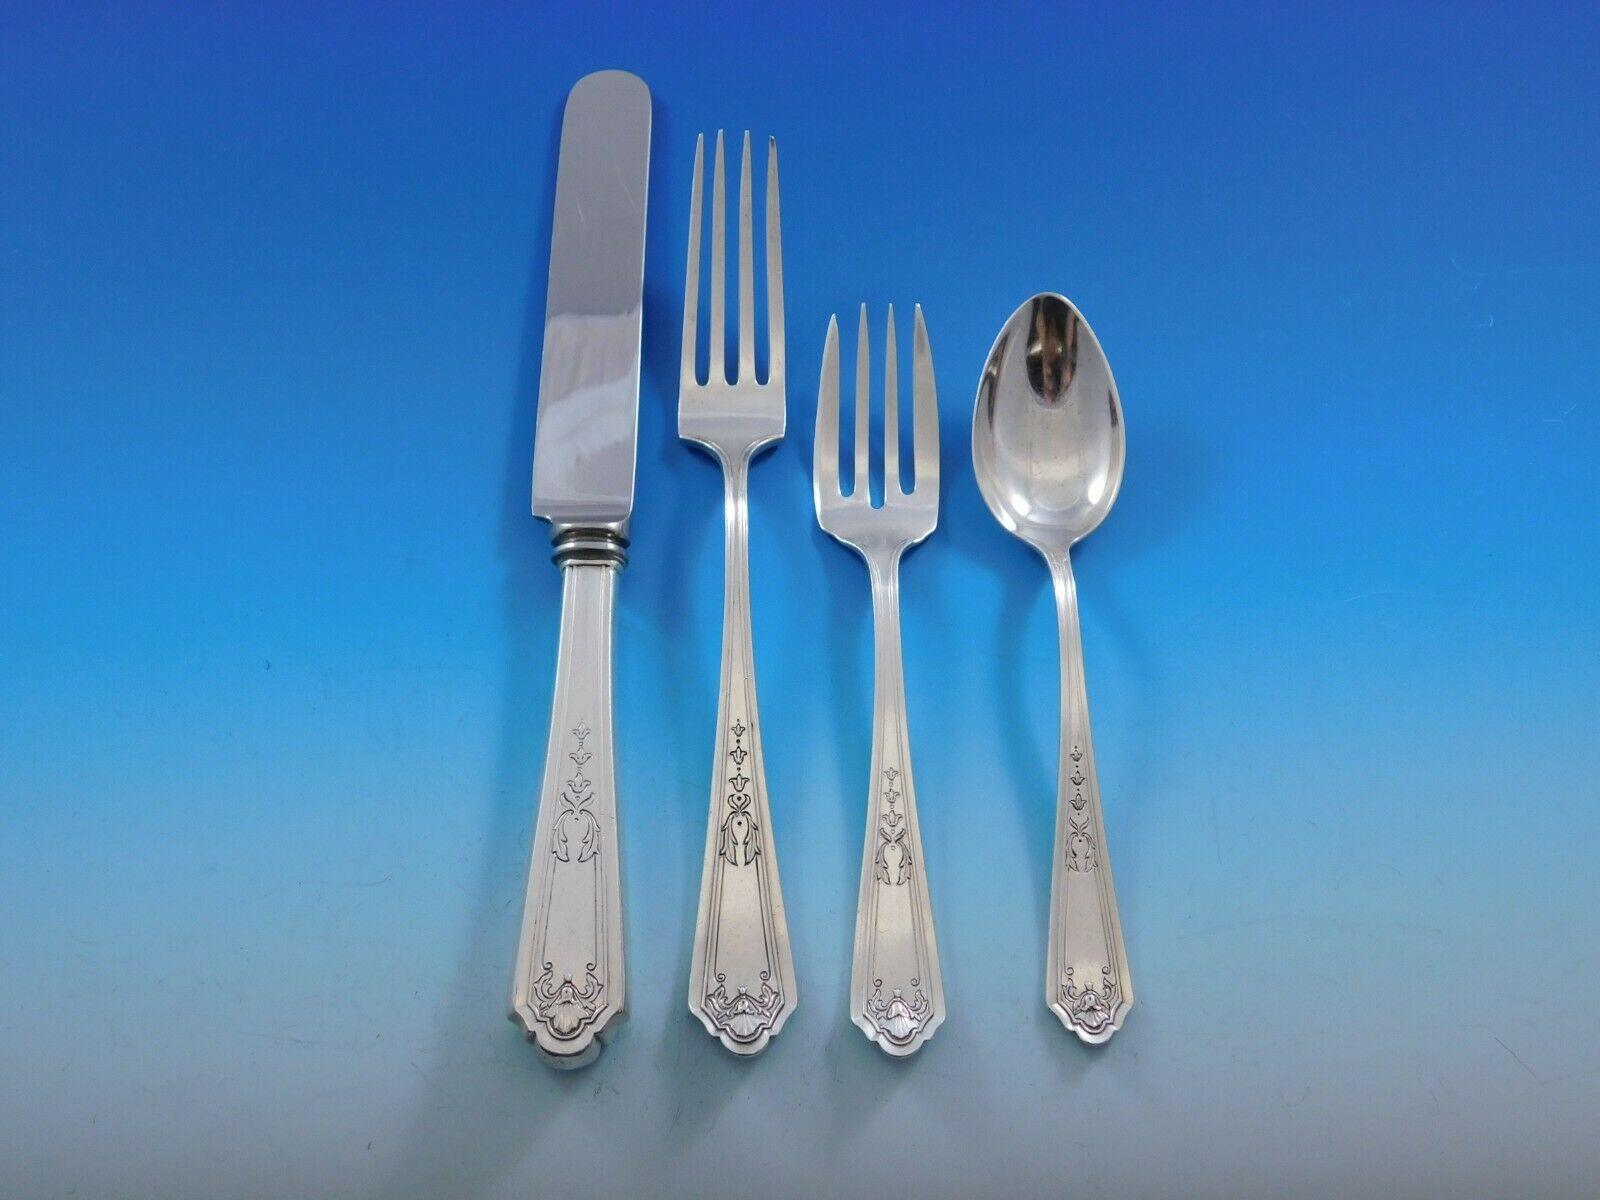 Regal Queen Louise by Watson sterling silver flatware set, 102 pieces. This set includes:

8 knives, blunt blade, 8 5/8